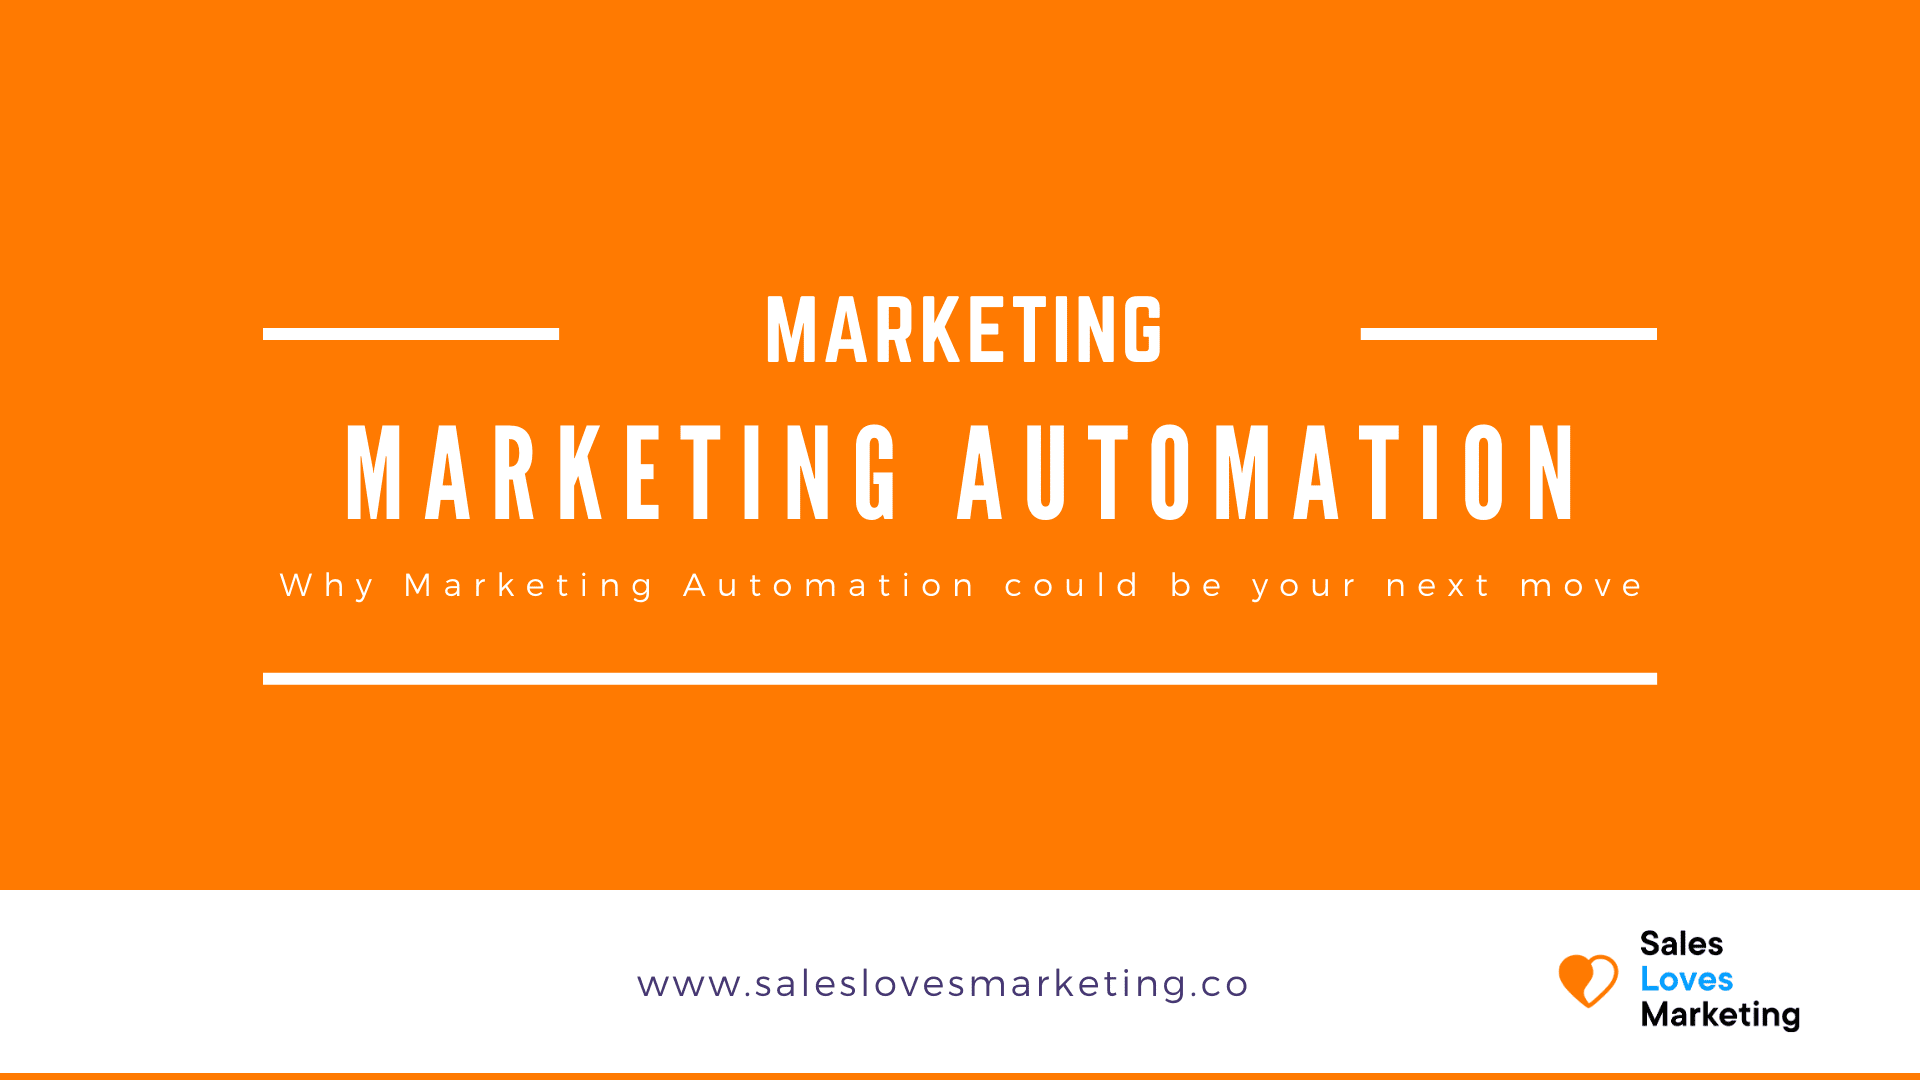 Why Marketing Automation Could be Your Next Big Move